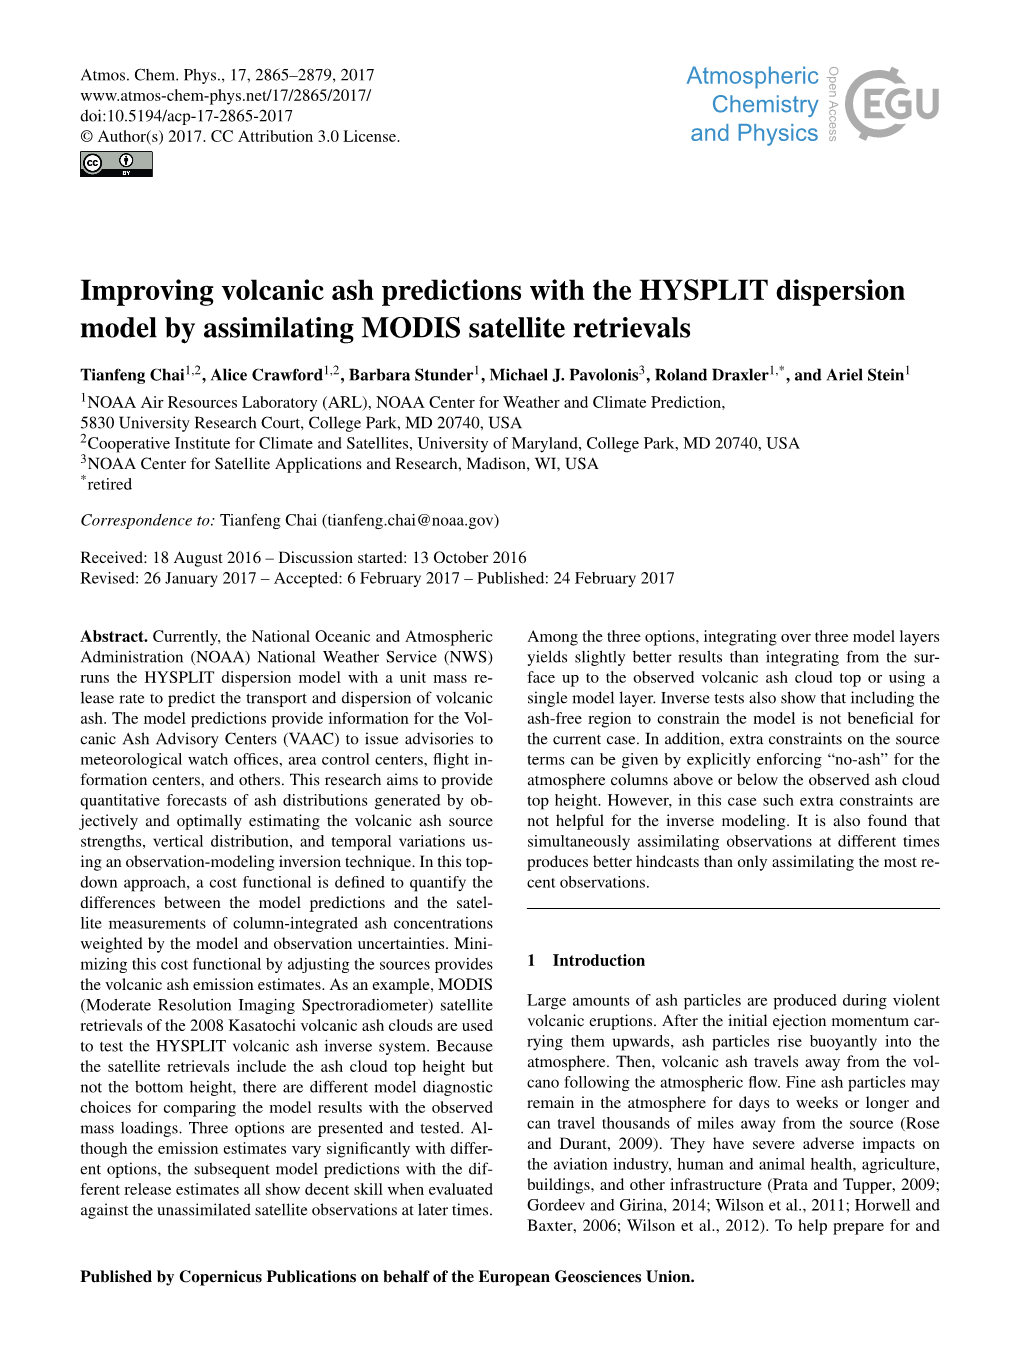 Improving Volcanic Ash Predictions with the HYSPLIT Dispersion Model by Assimilating MODIS Satellite Retrievals